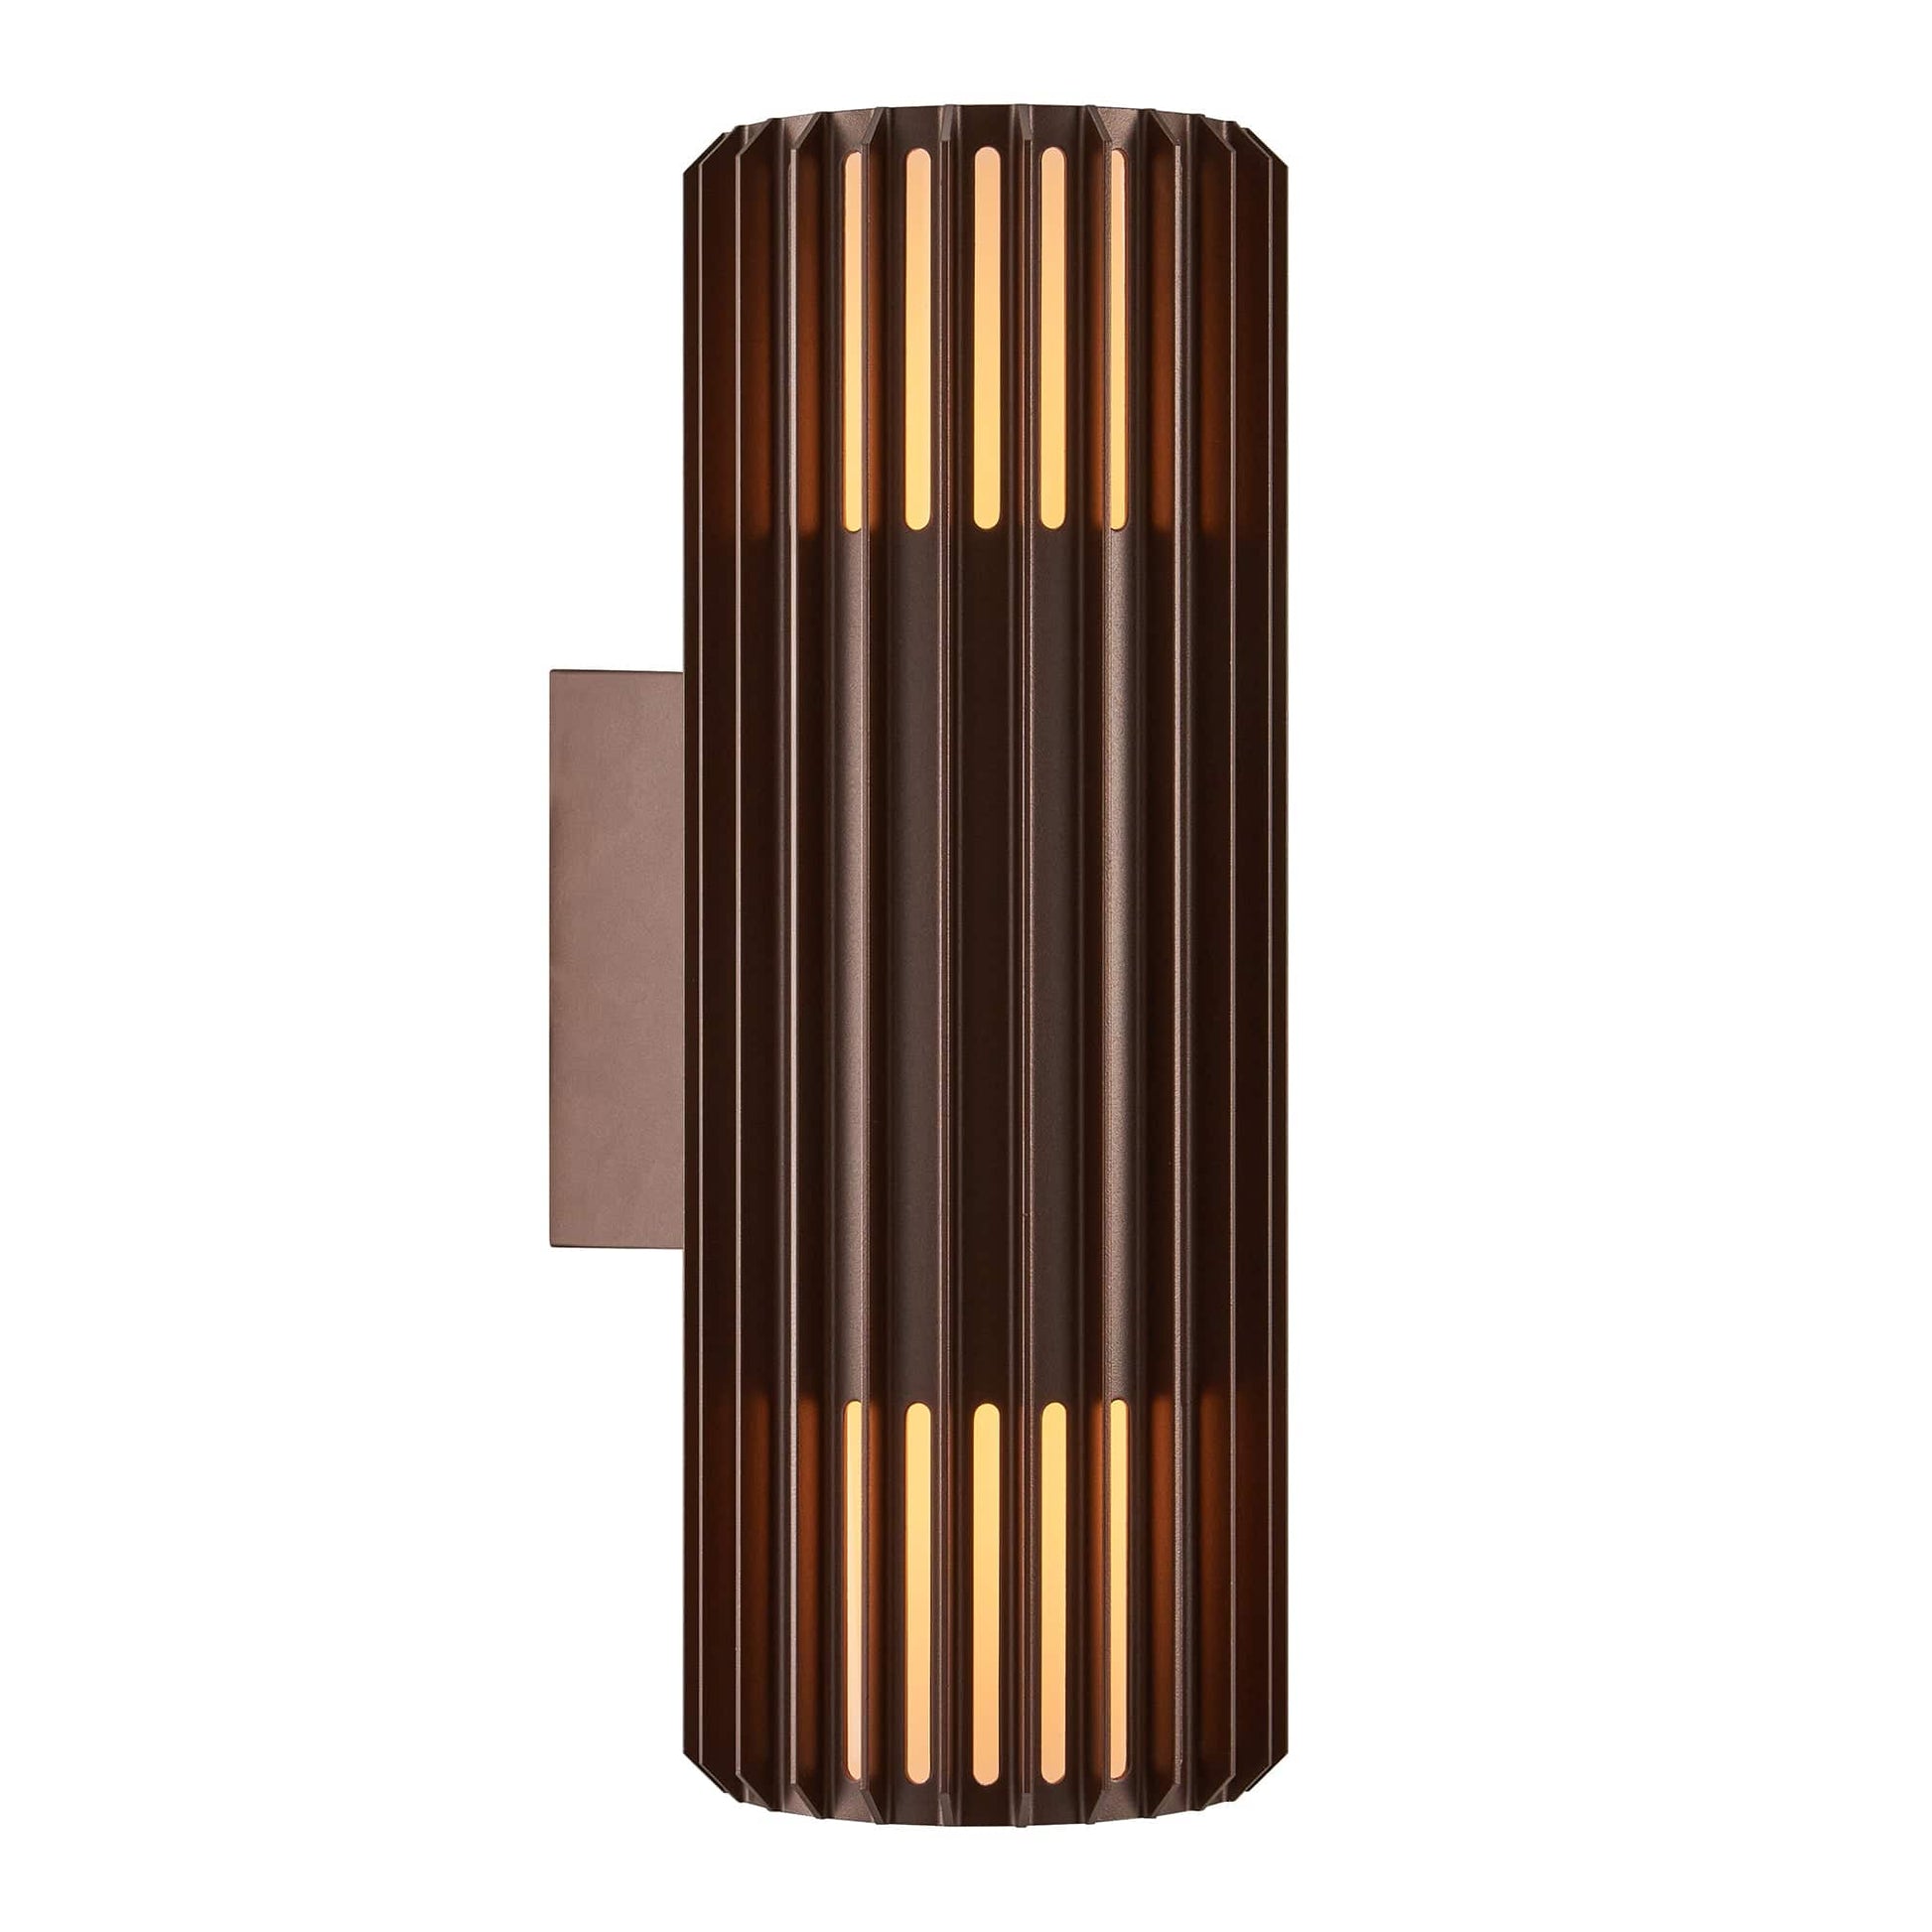 Nordlux Outdoor Lights Brown metalic Aludra Double Outdoor Wall Light